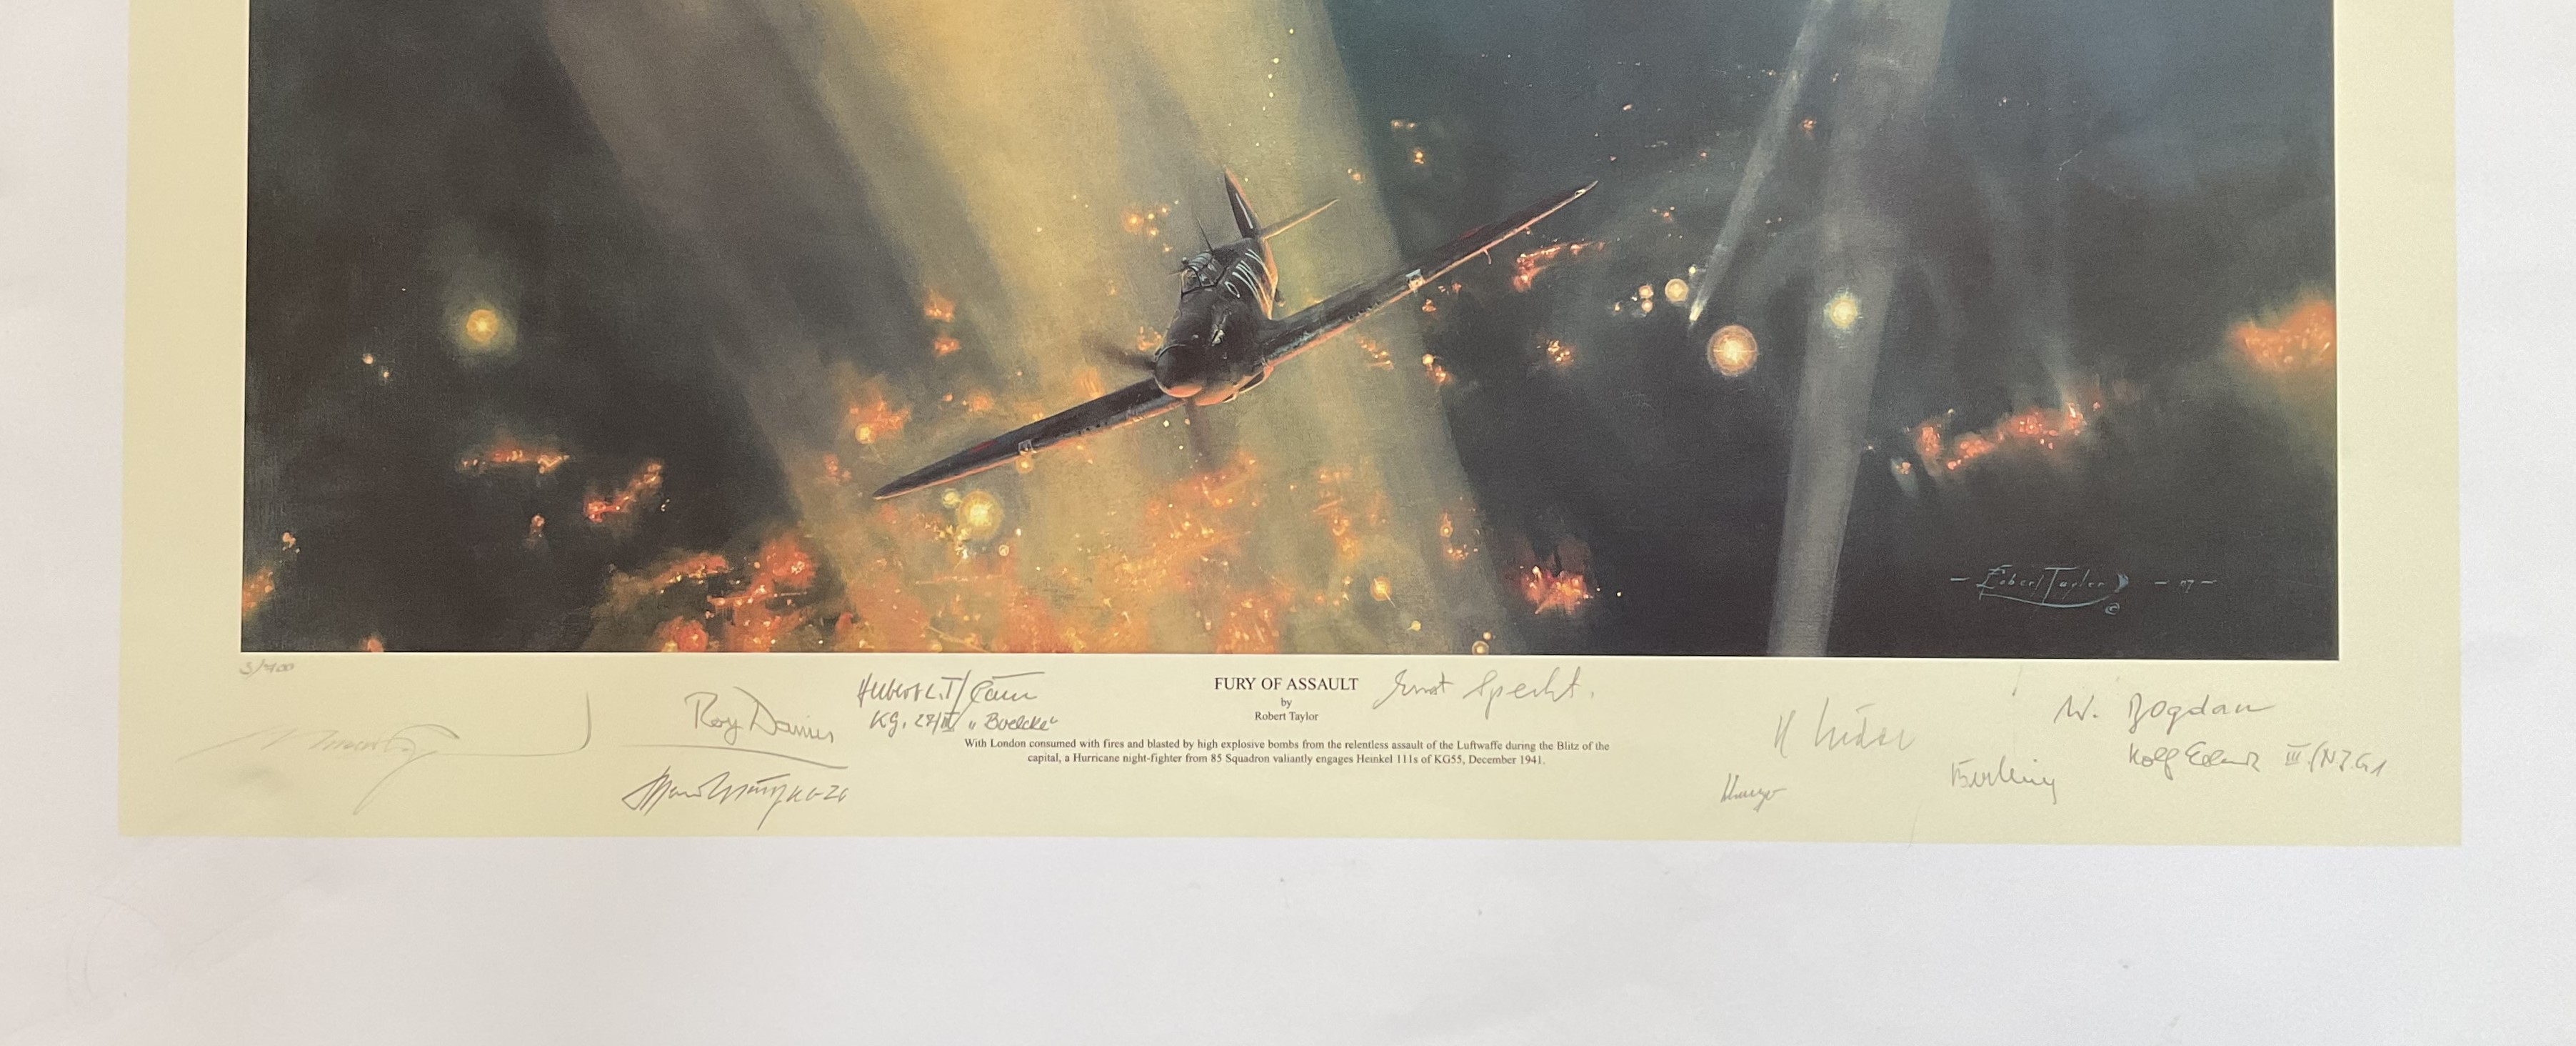 WWII Fury of Assault 29x24 inches colour print limited edition colour print 3/700 signed in pencil - Image 2 of 2